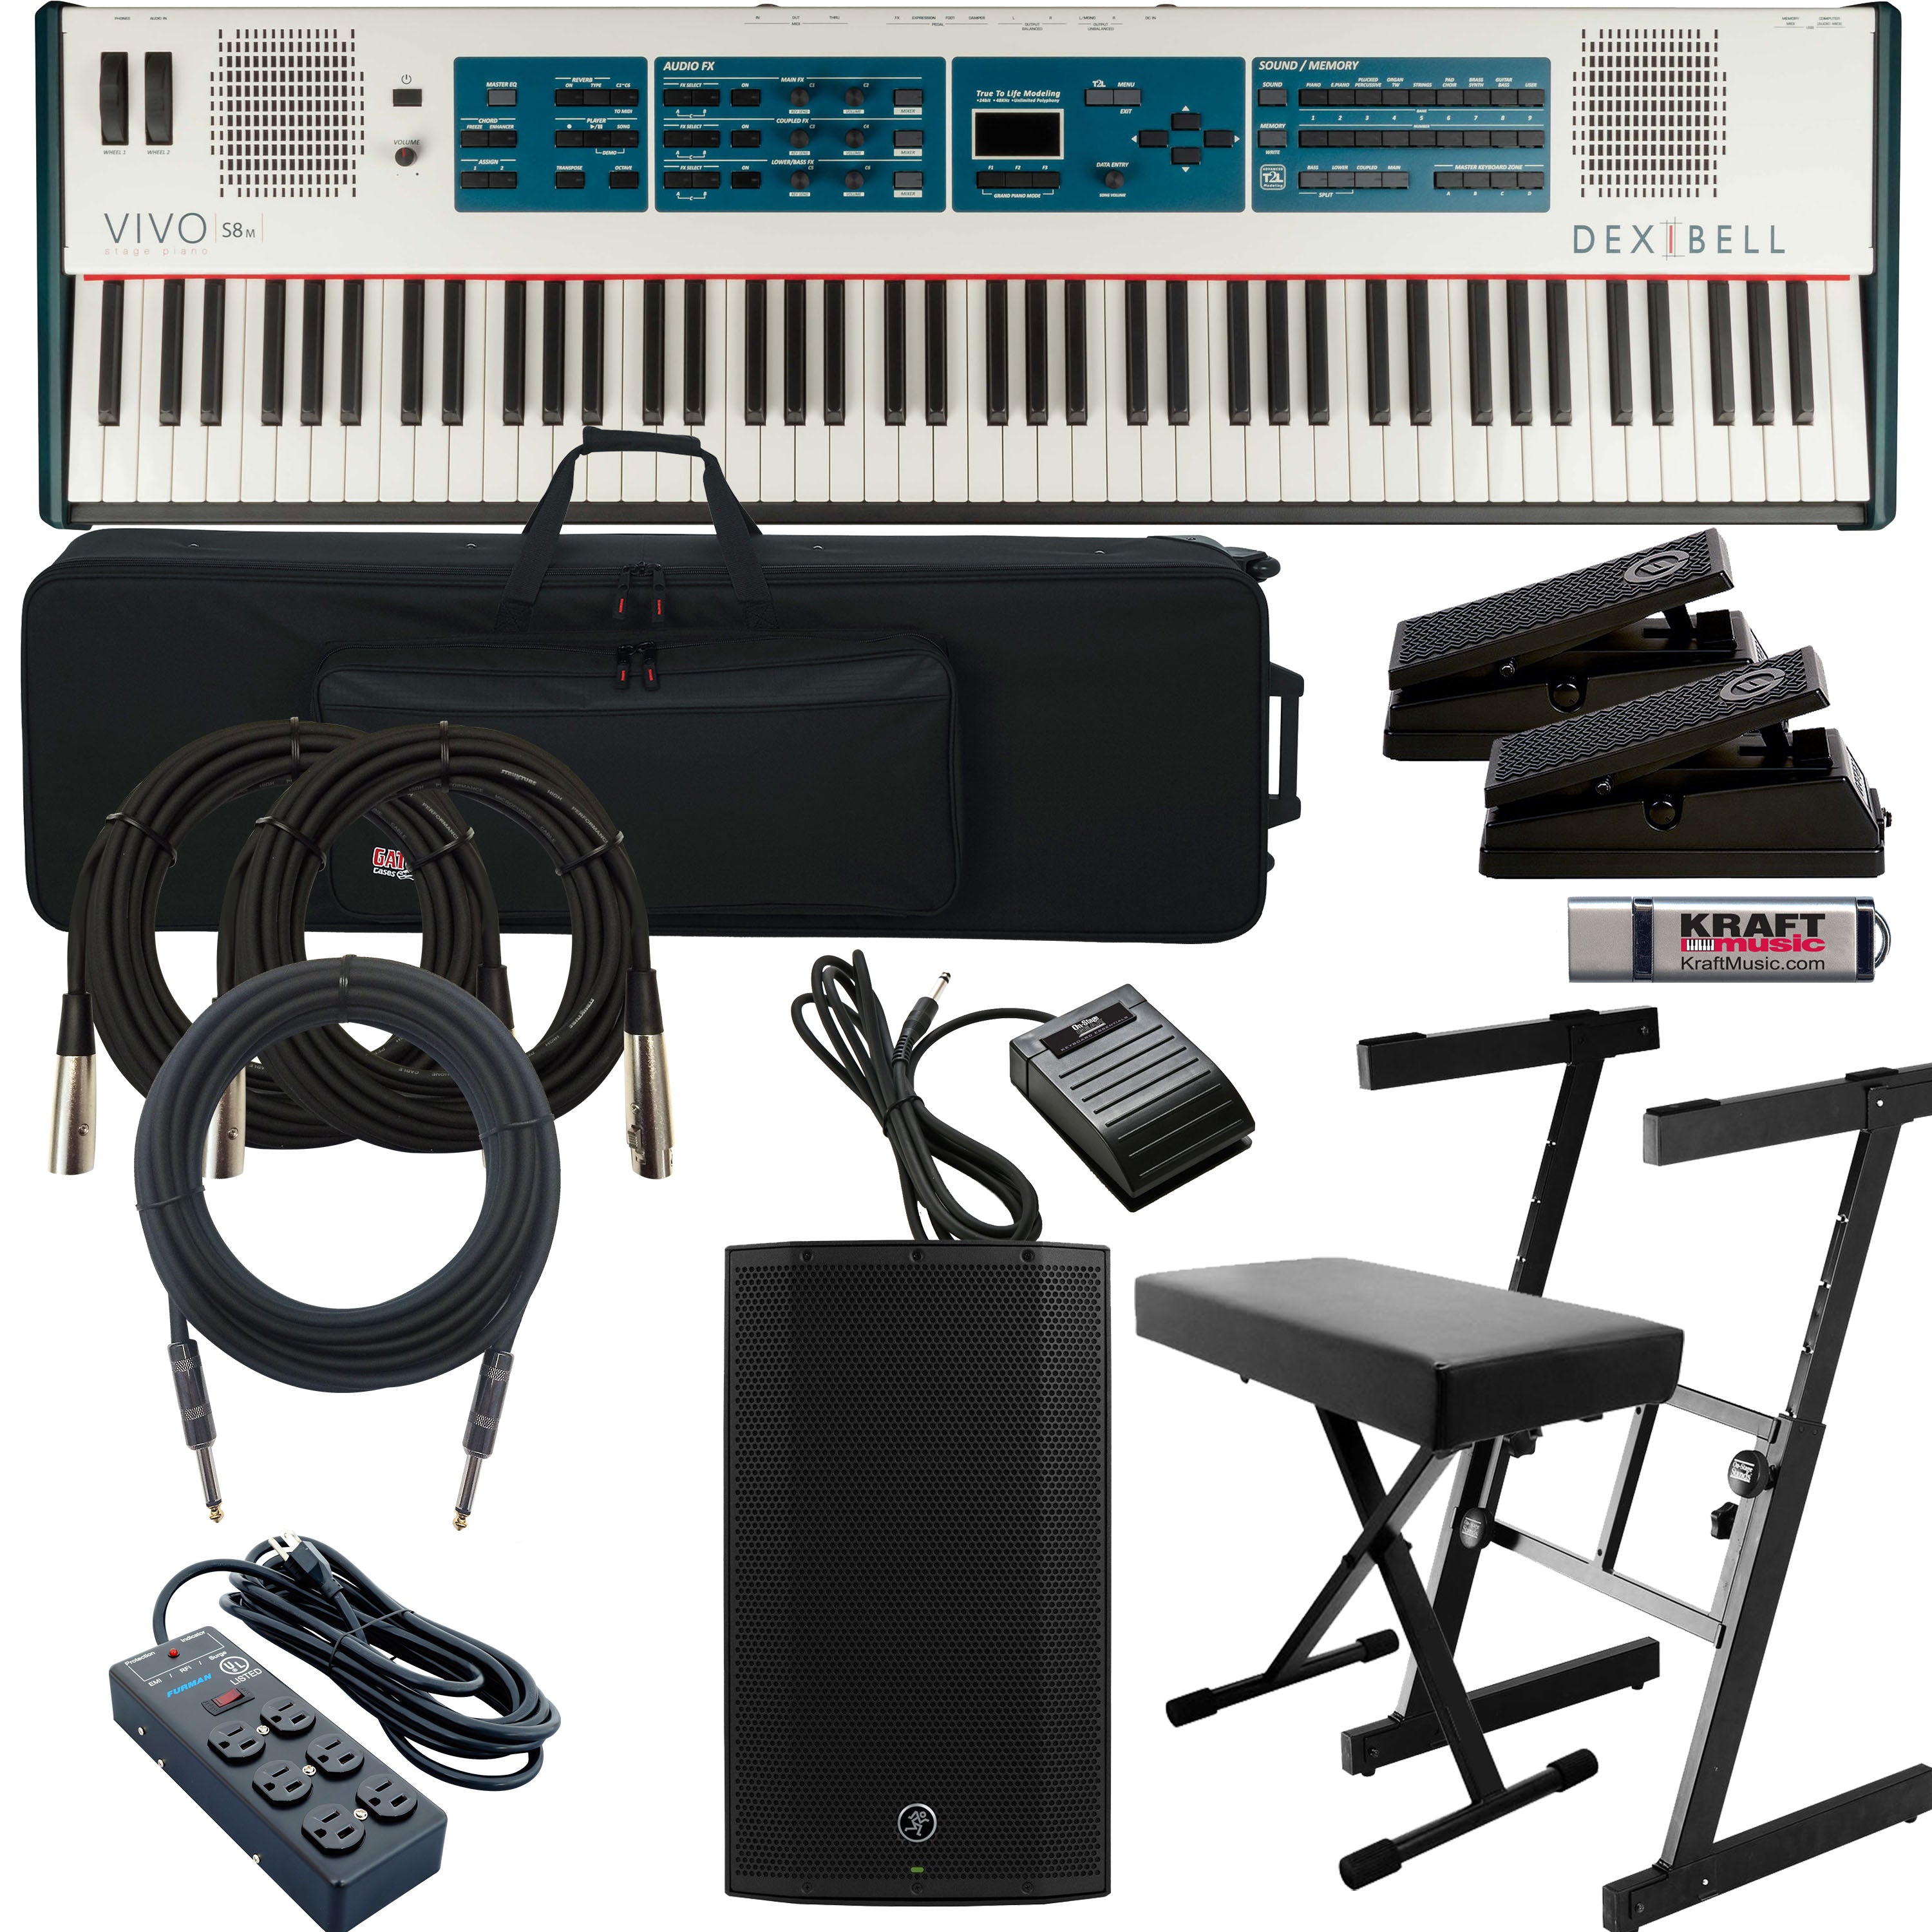 Collage image of the Dexibell VIVO S8M Stage Piano COMPLETE STAGE BUNDLE